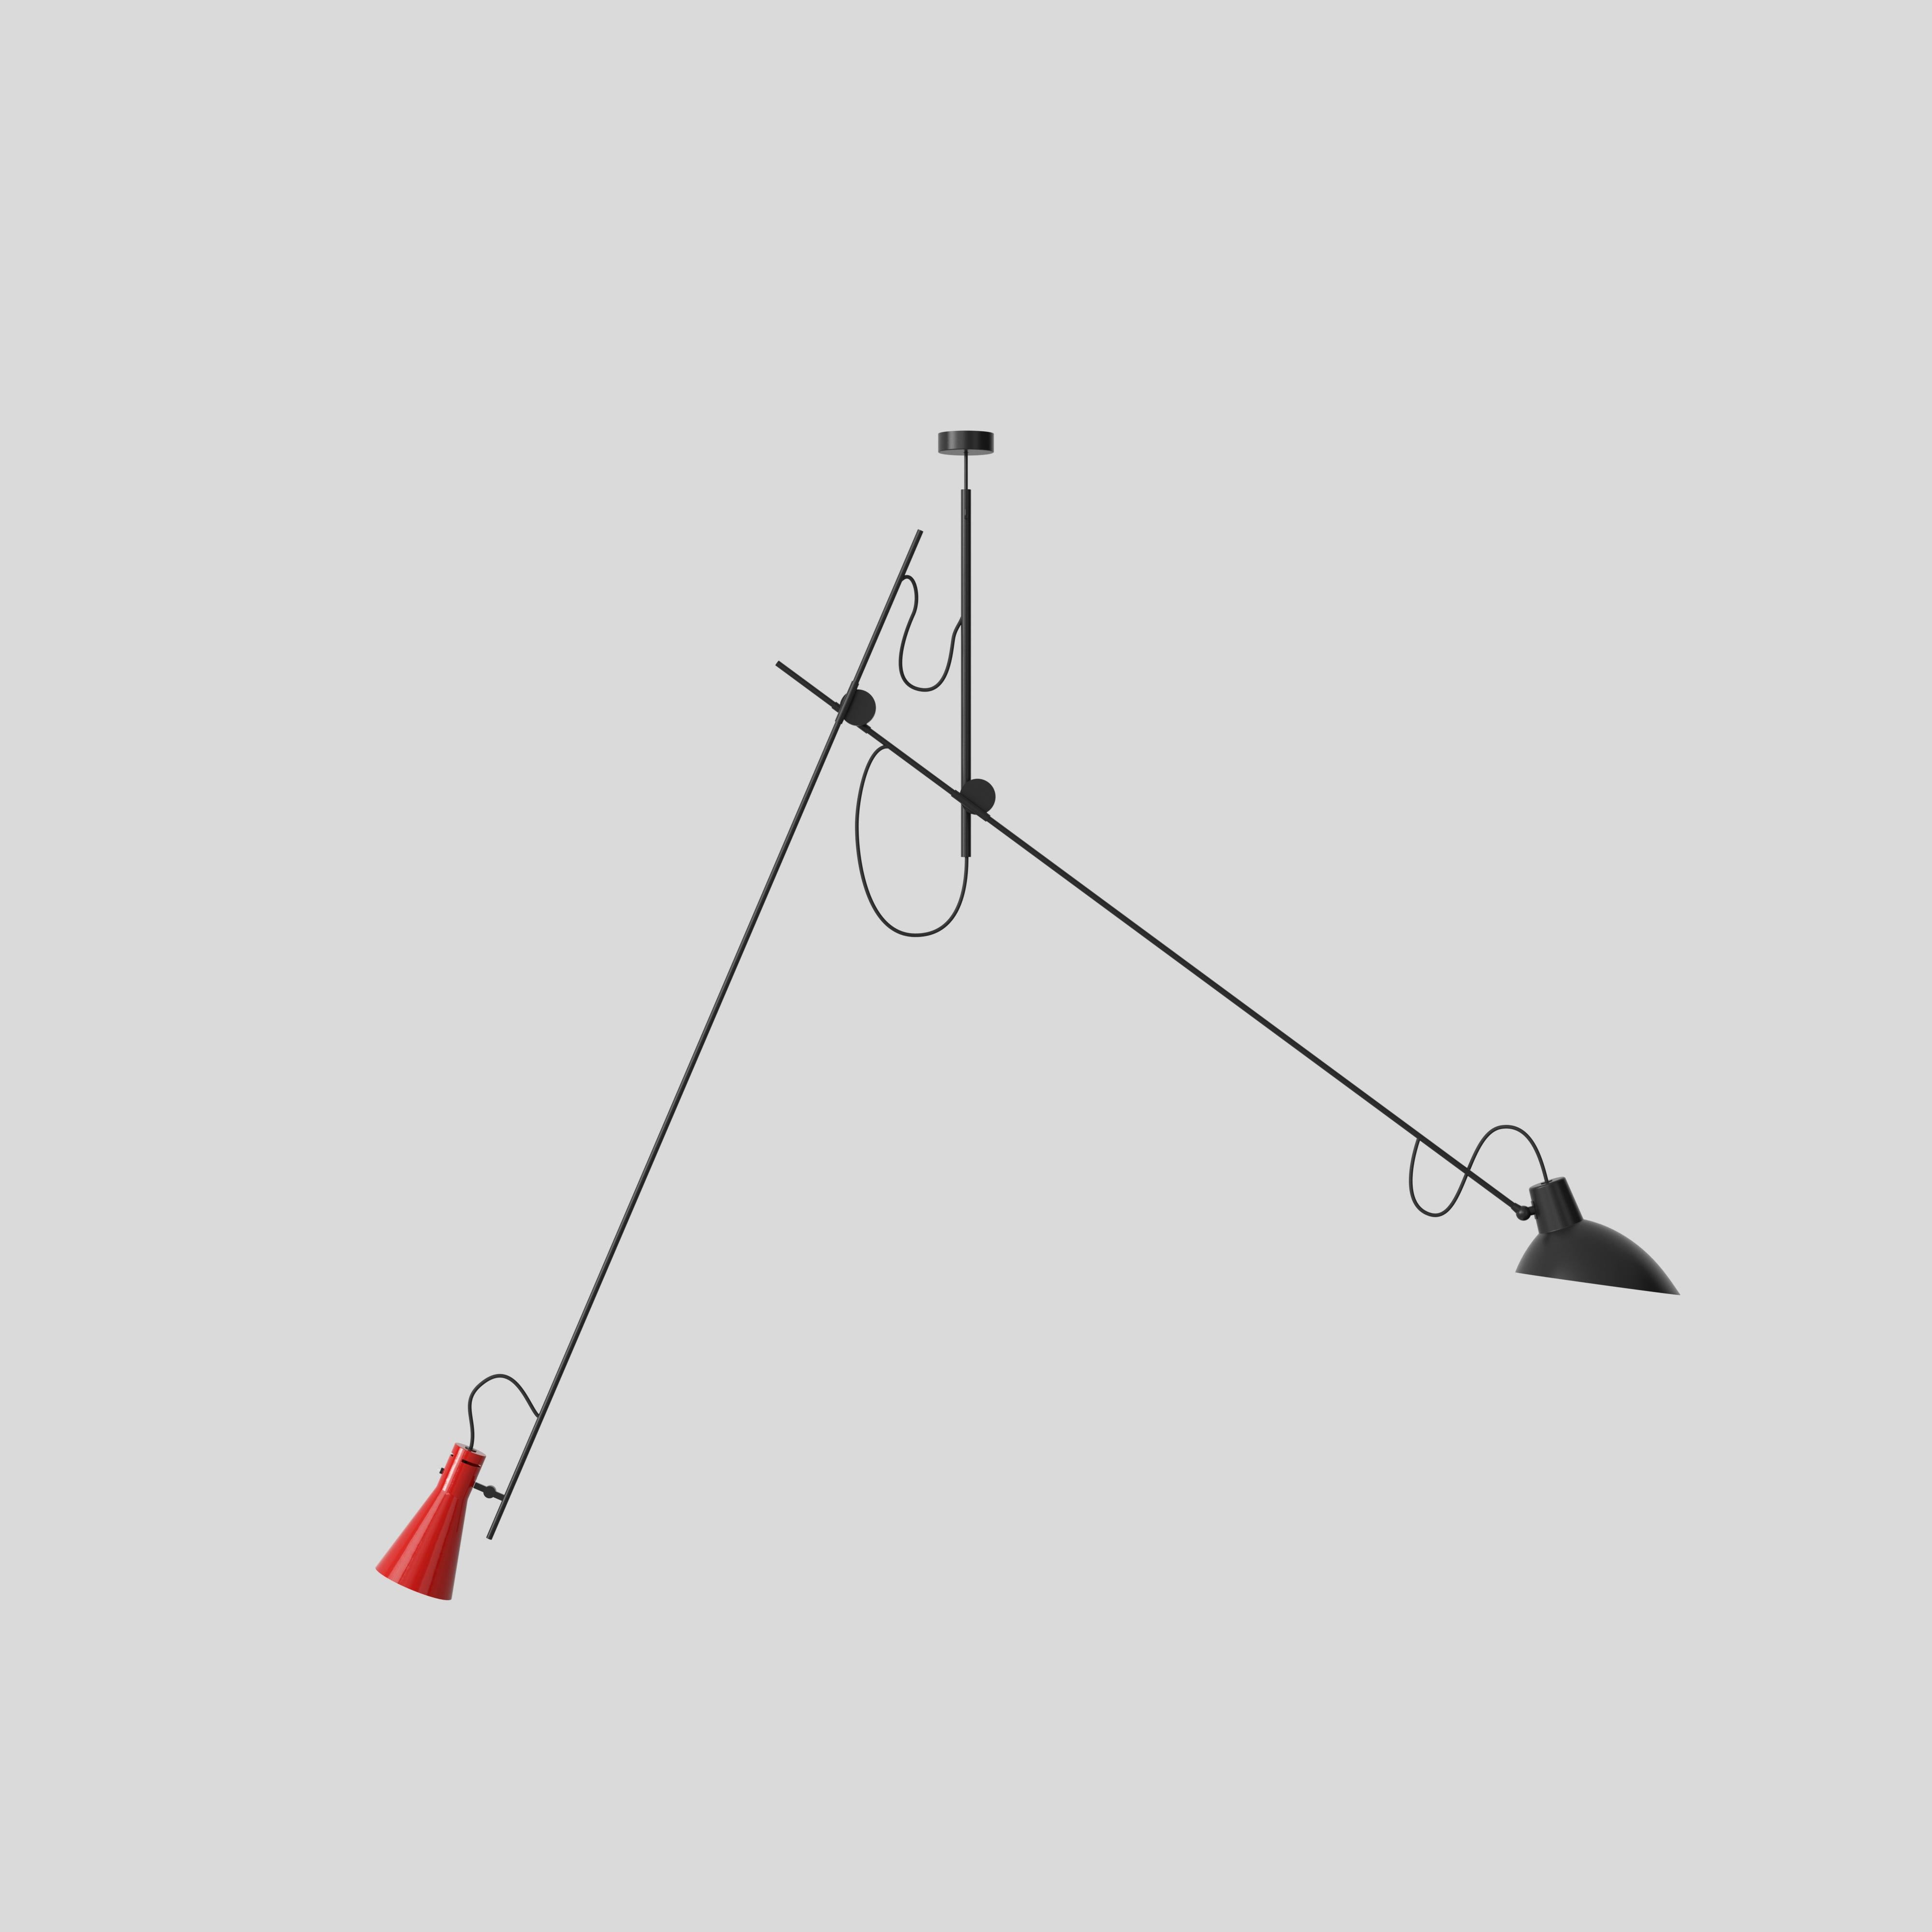 VV Cinquanta Suspension lamp
Design by Vittoriano Viganò
This version is with red and black lacquered reflectors and black frame.

The VV Cinquanta Suspension is elegant and versatile with two posable direct light sources.

With a distinctive